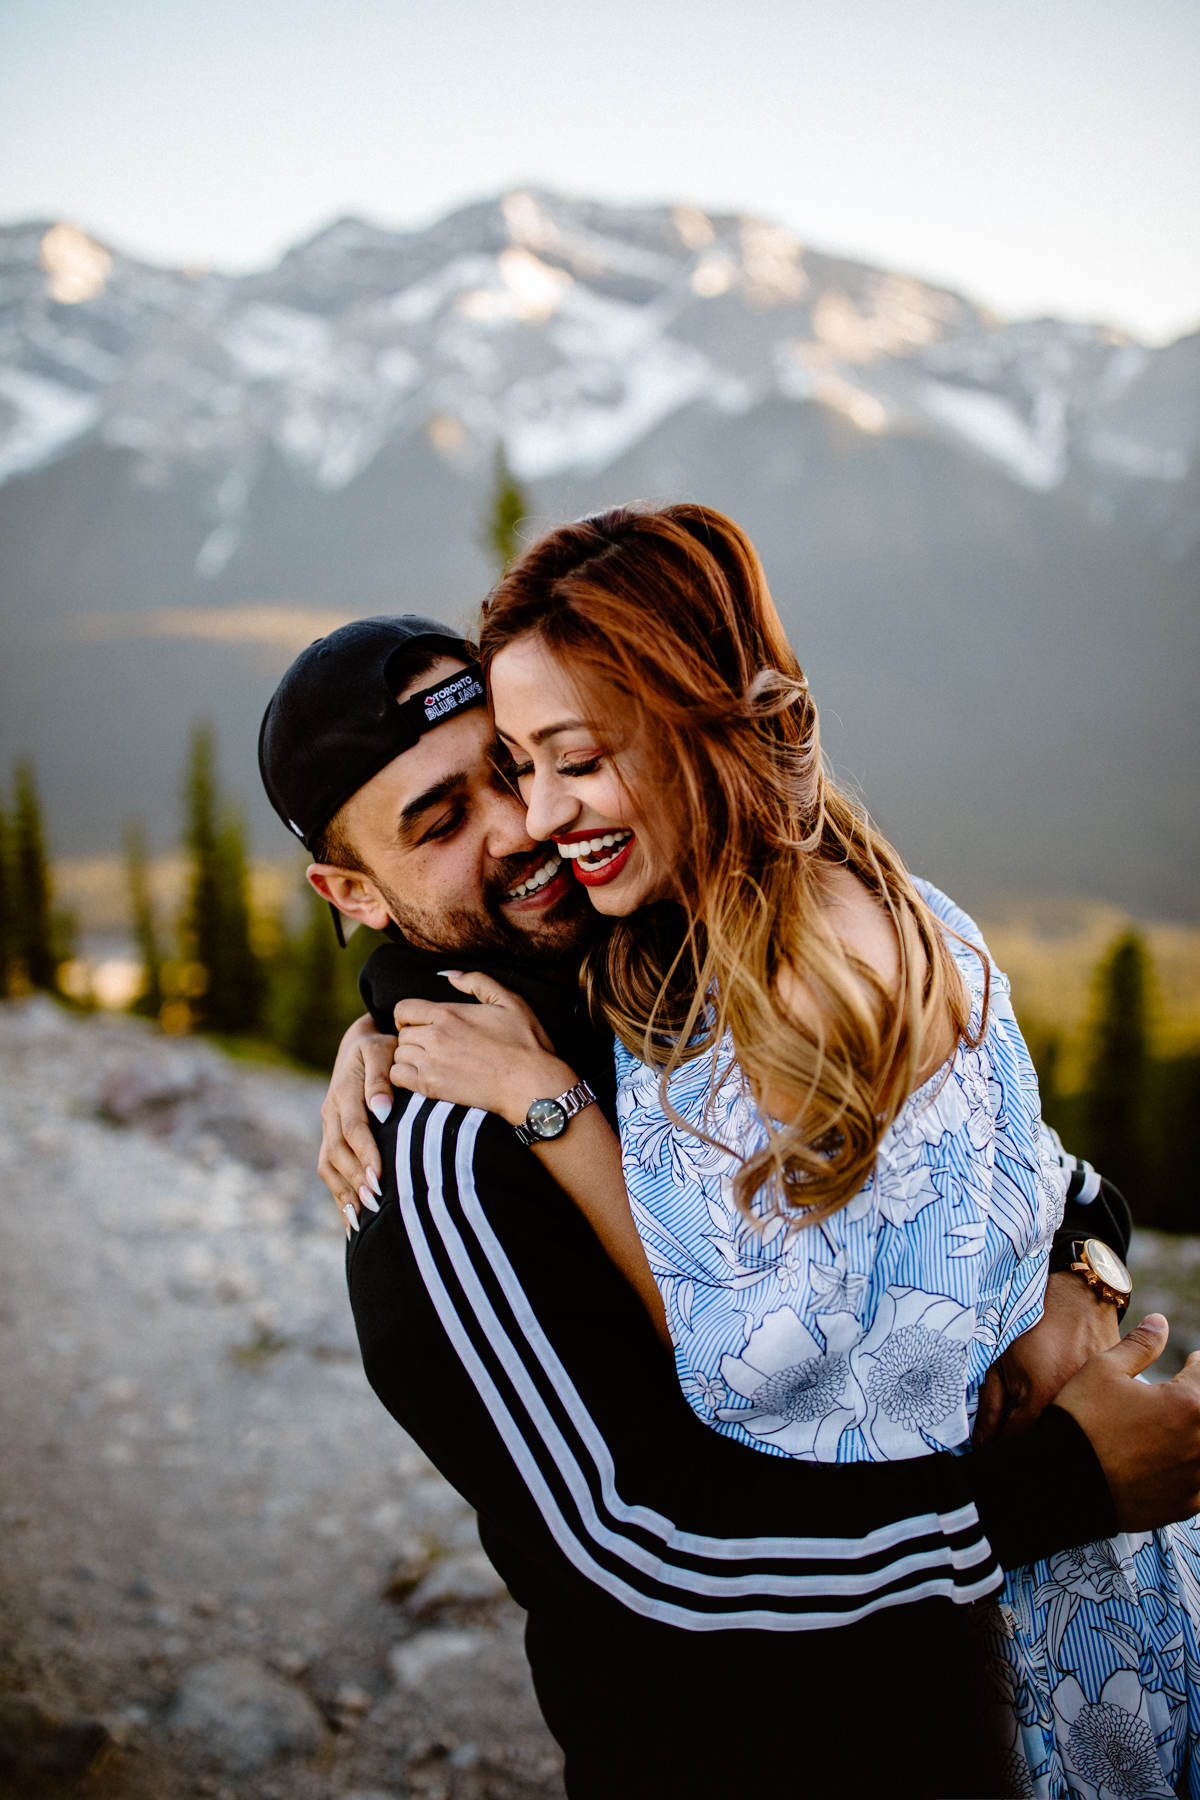 Surprise Proposal Photographers in Banff - Photo 9